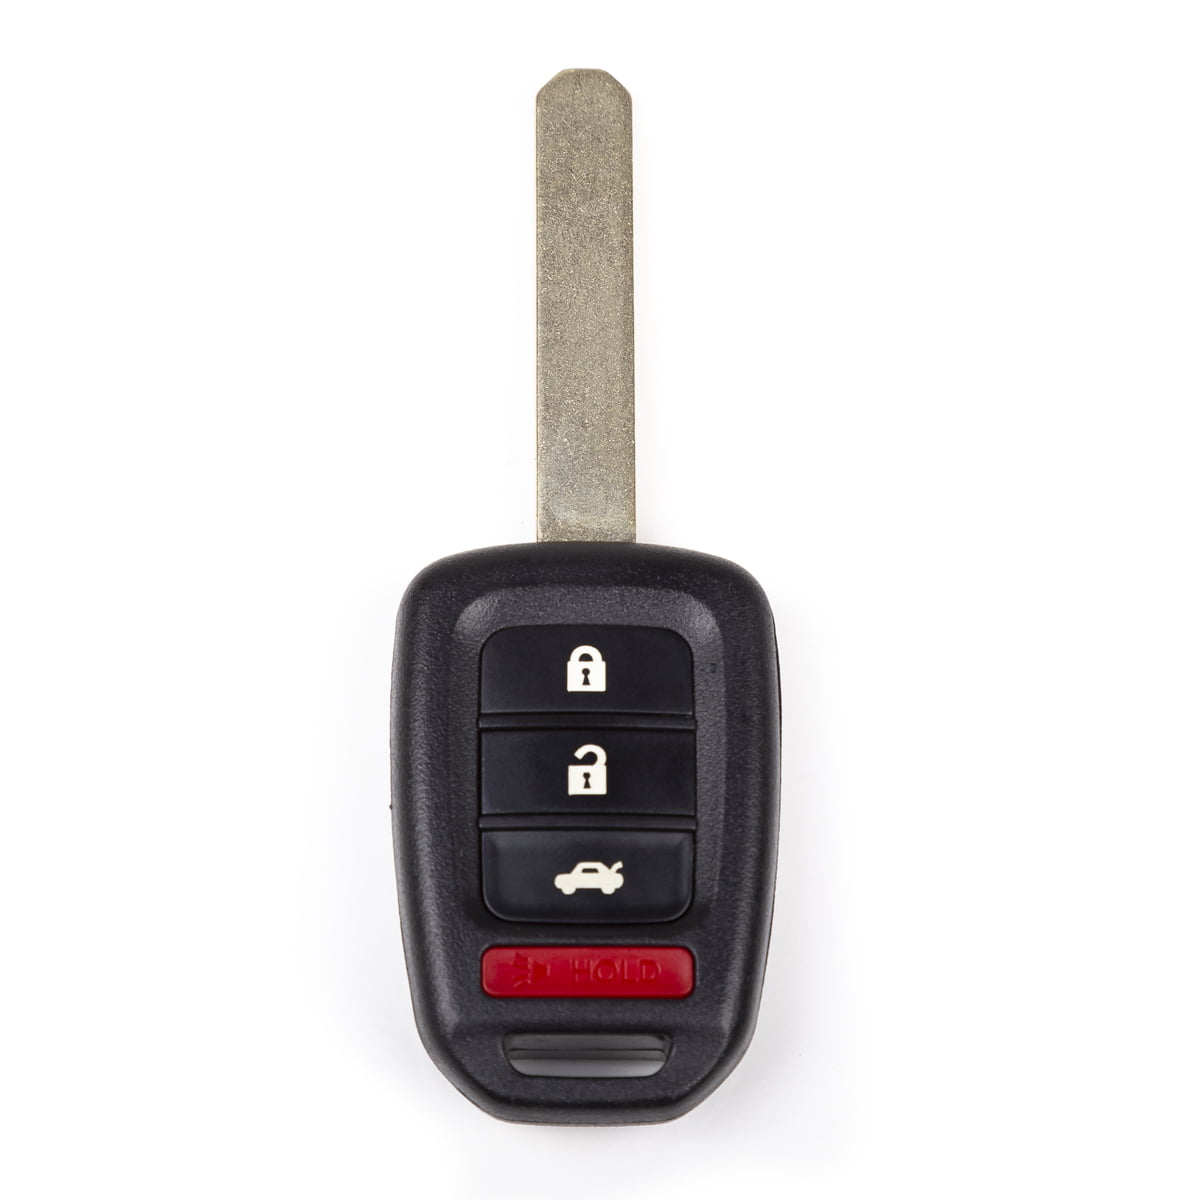 How To Open Honda Key Fob 2014 / How To Change The Battery